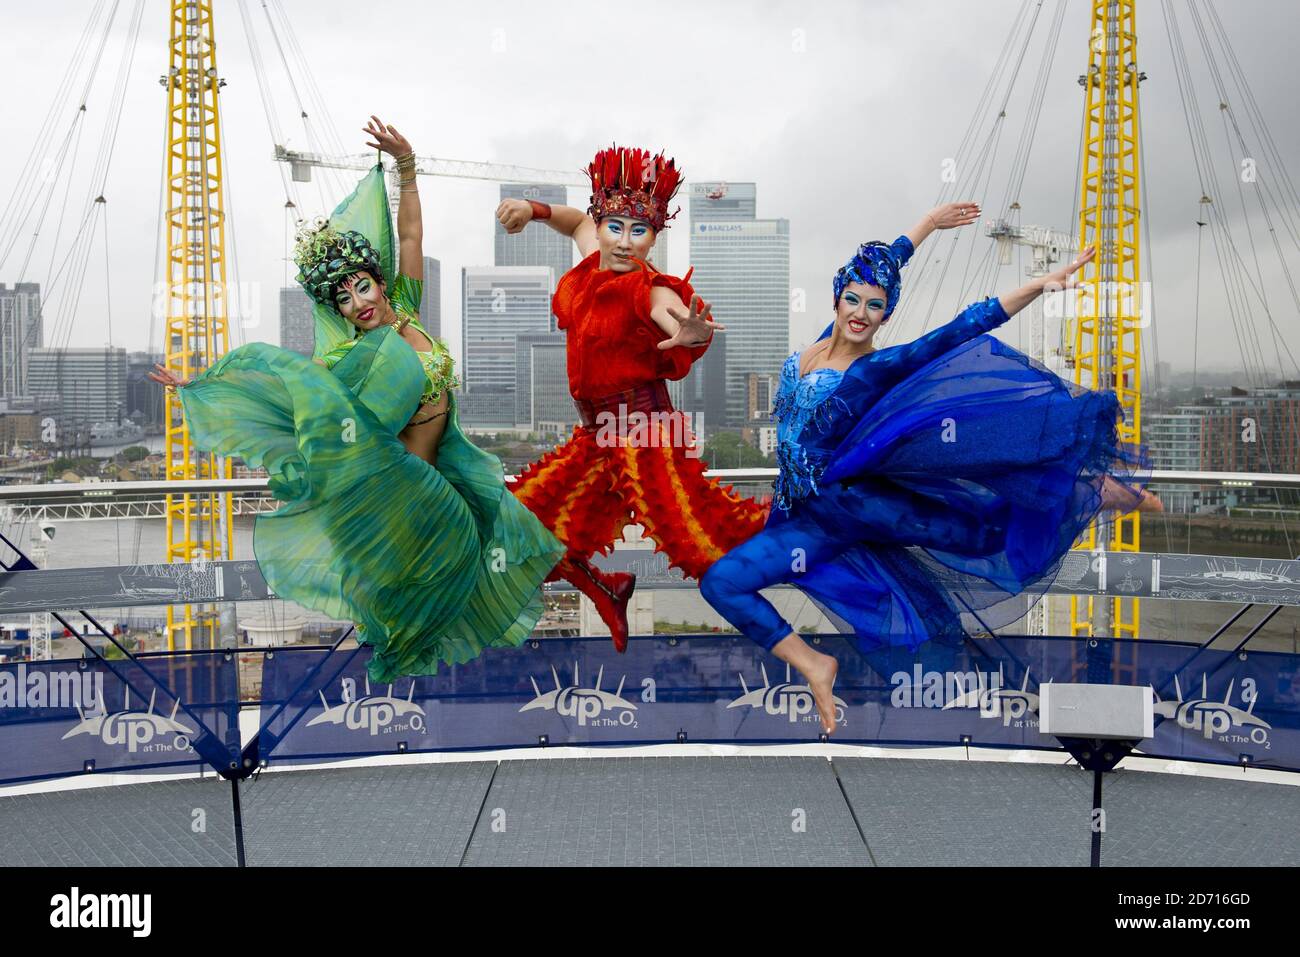 Characters representing water (Oceane), air (Azala) and fire (Yao) from Dralion, Cirque du Soleil, pose at Up At the O2, At The O2 arena in east London. Dralion runs from 4th - 8th June at The O2 Stock Photo